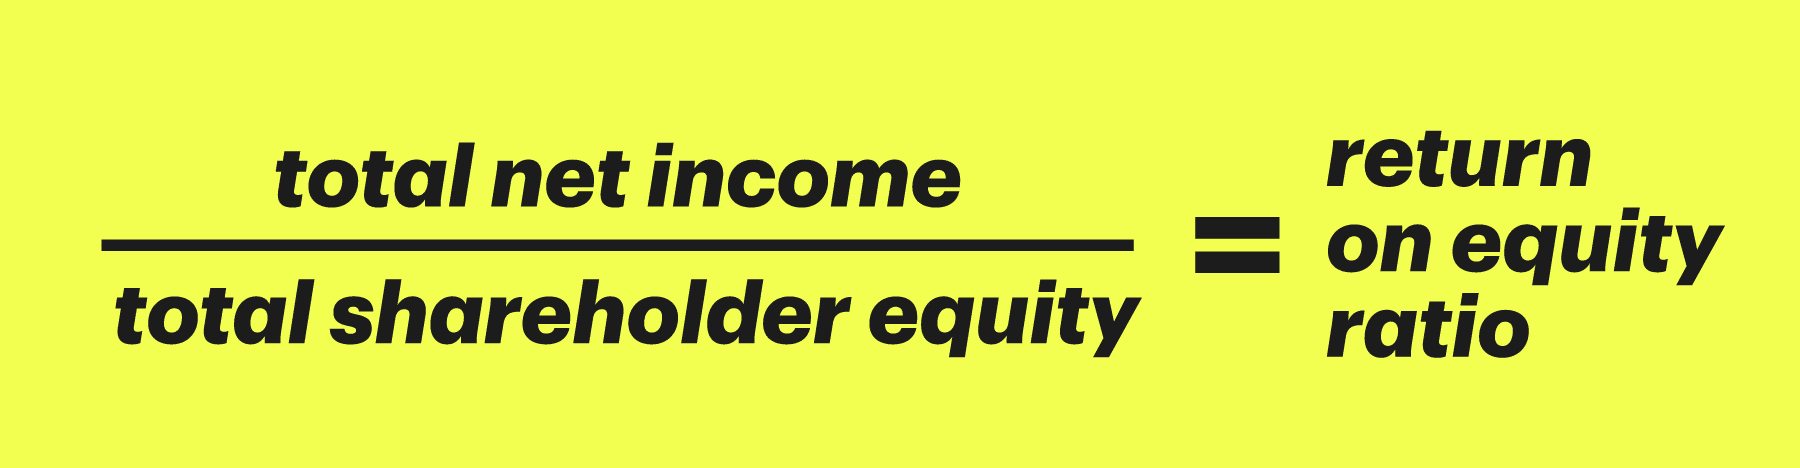 Equation that states "Total net income over total shareholder equity equals return on equity ratio".